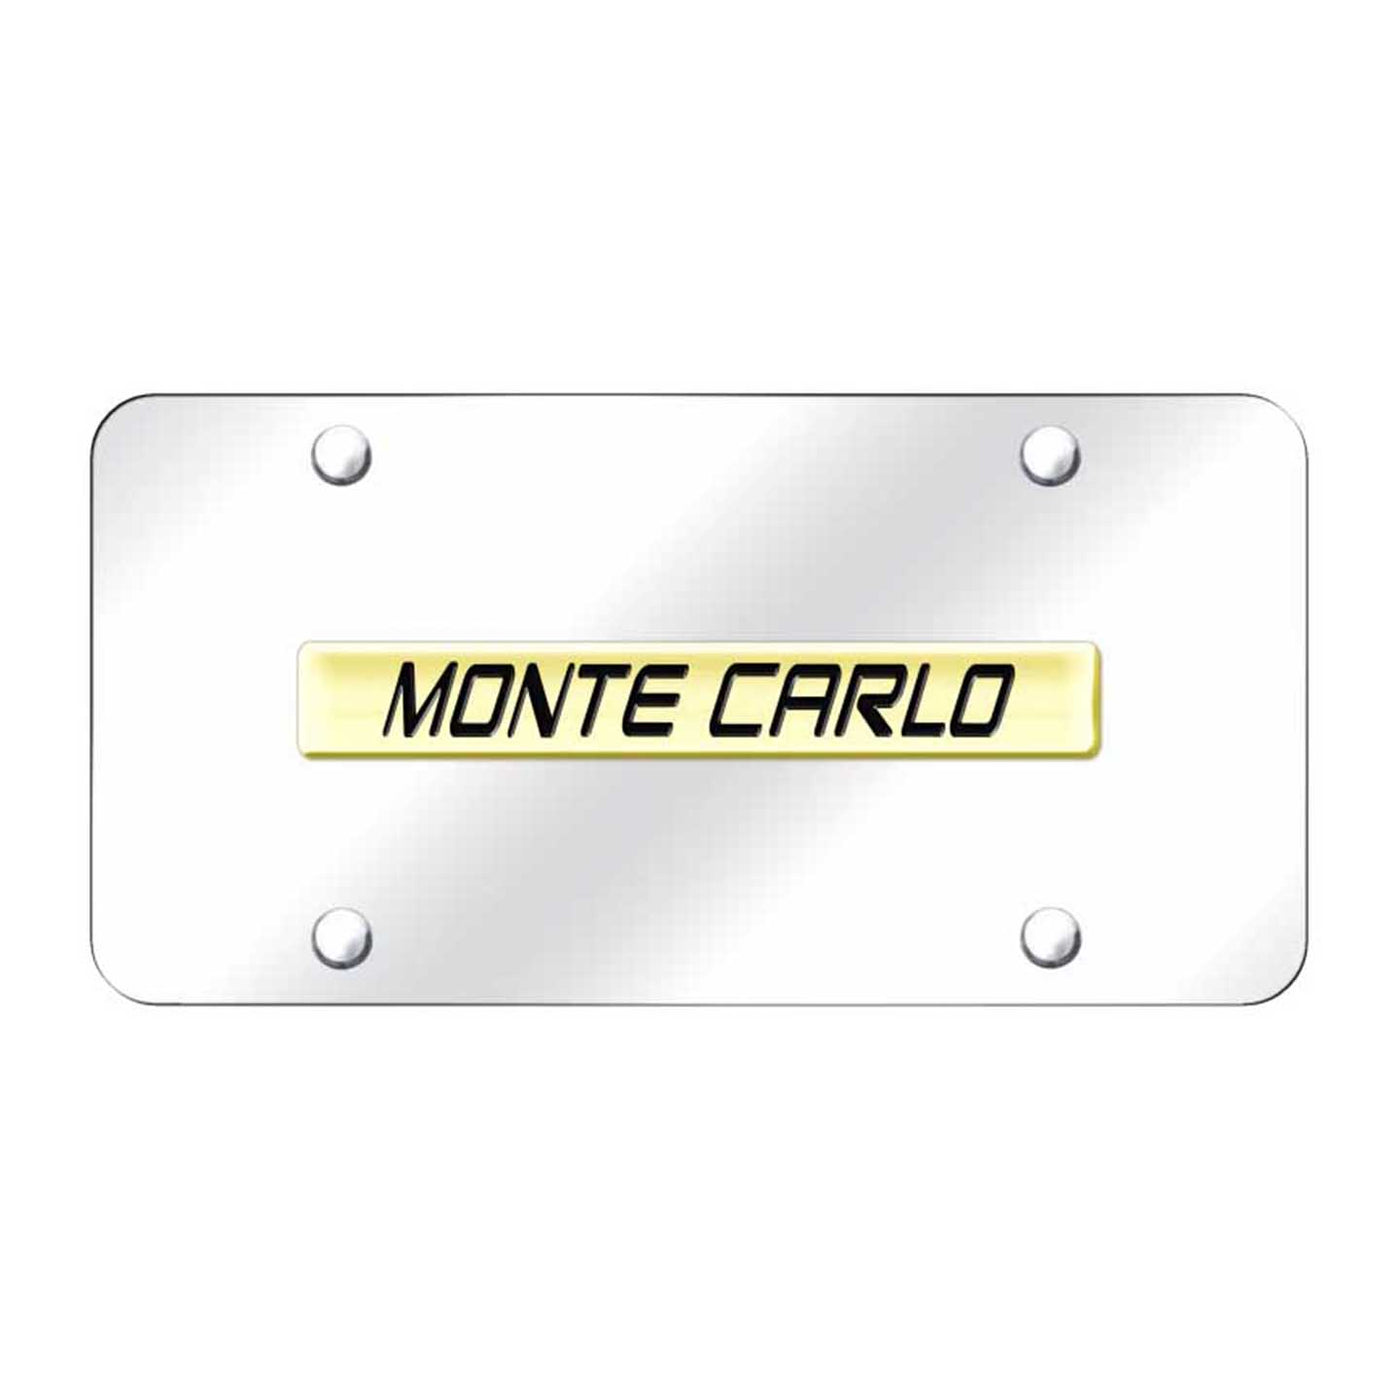 Monte Carlo Name License Plate - Gold on Mirrored